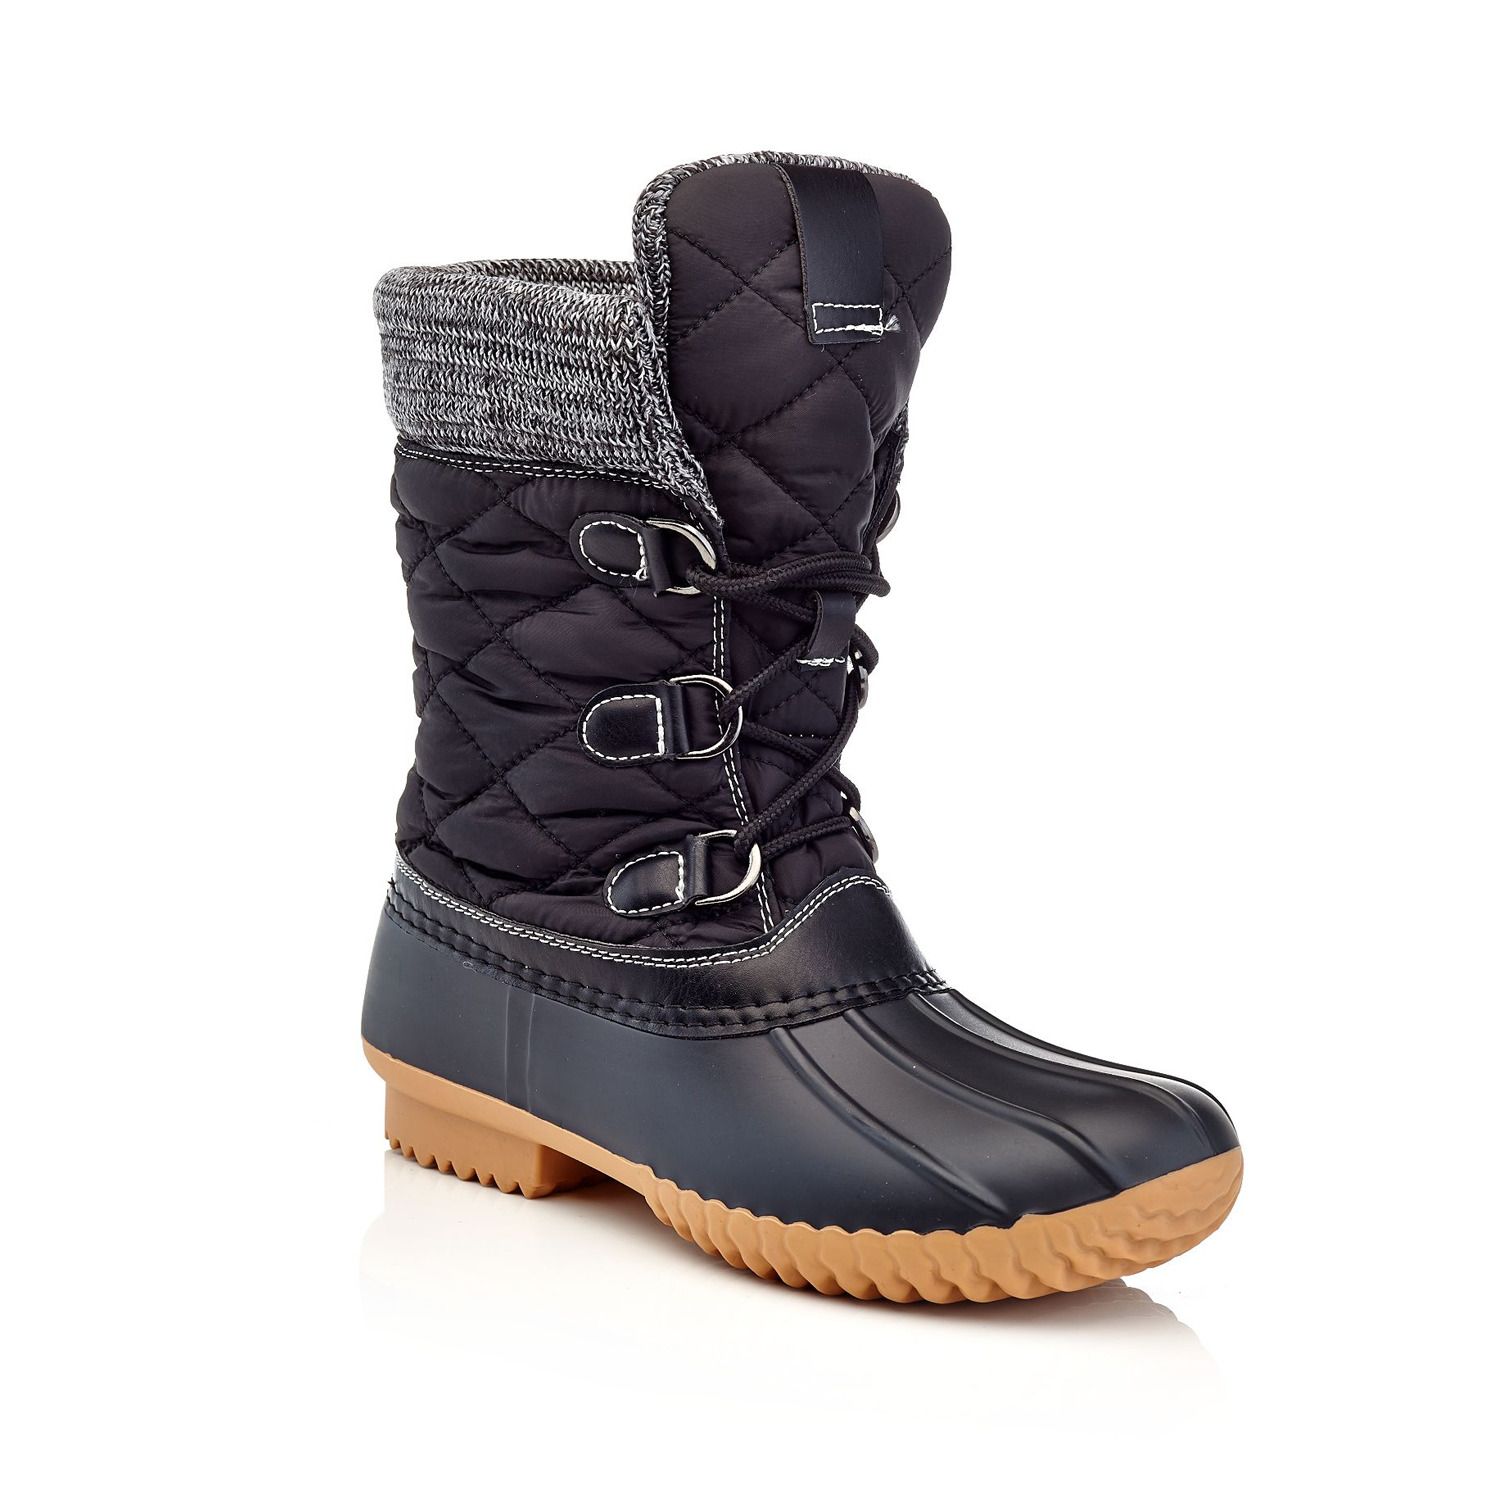 Image for Henry Ferrera Mission 777 Women's Water-Resistant Winter Boots at Kohl's.